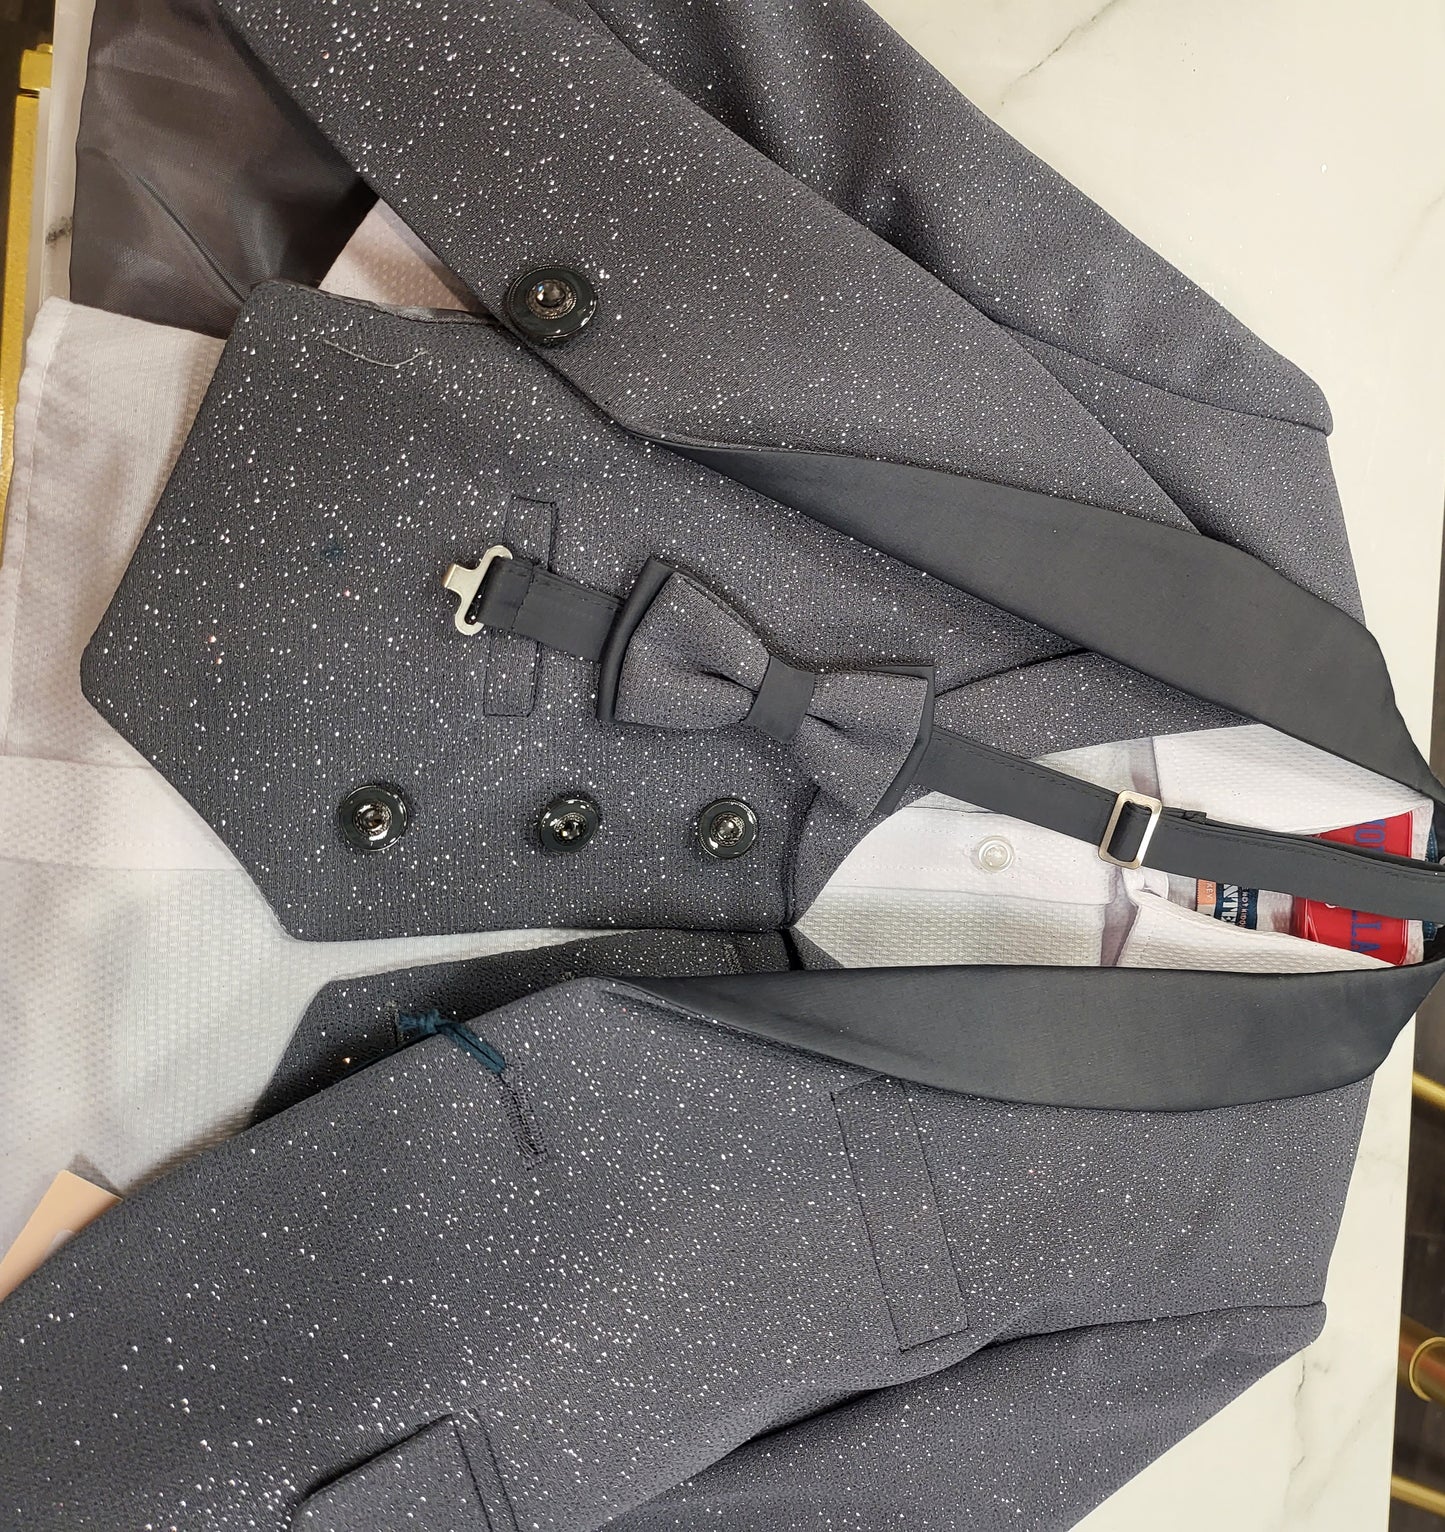 Montella Grey and Bling Suit